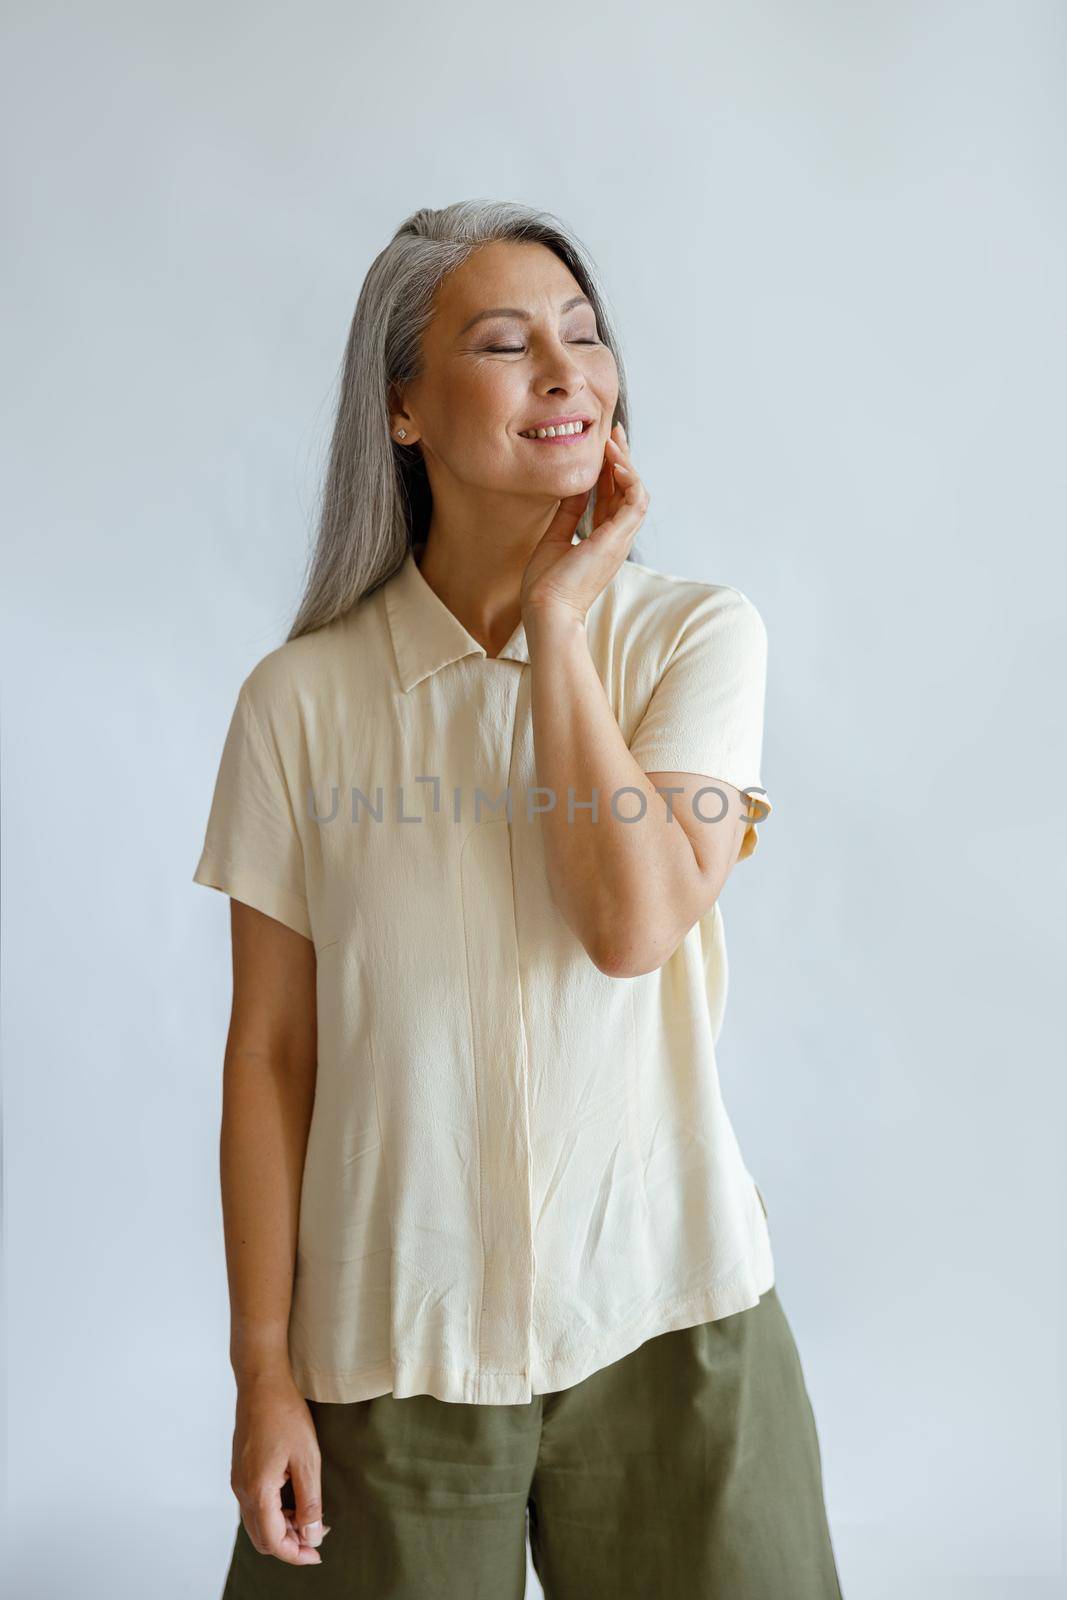 Cheerful silver haired lady in stylish casual outfit poses for camera on light grey background in studio. Mature beauty lifestyle